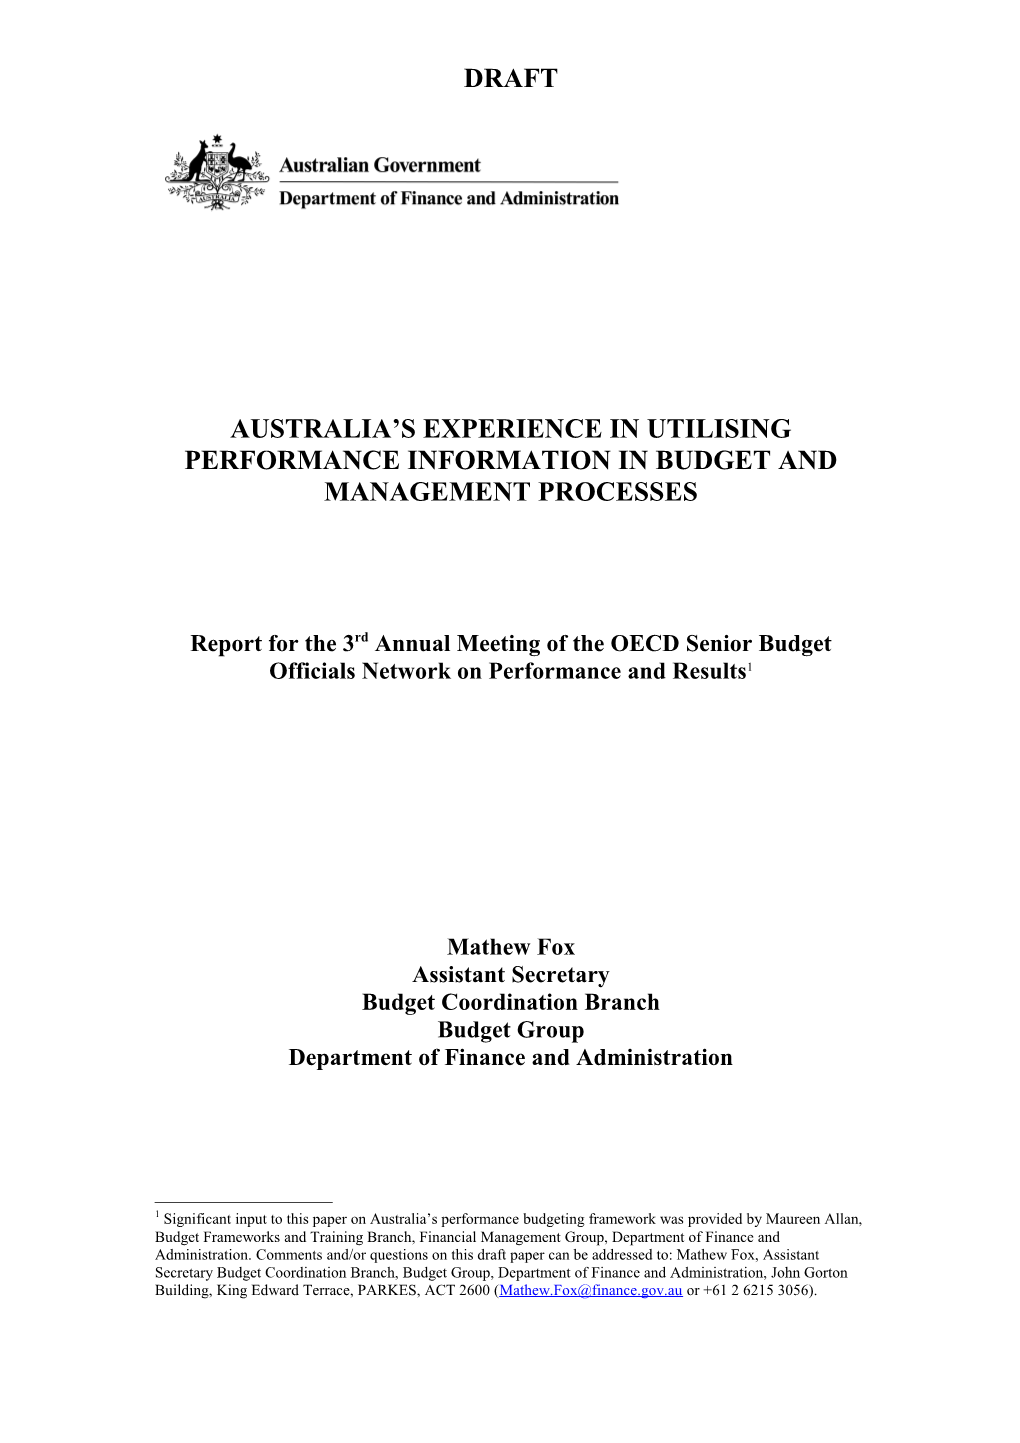 Australia S Experience in Utilising Performance Information in Budget and Management Processes